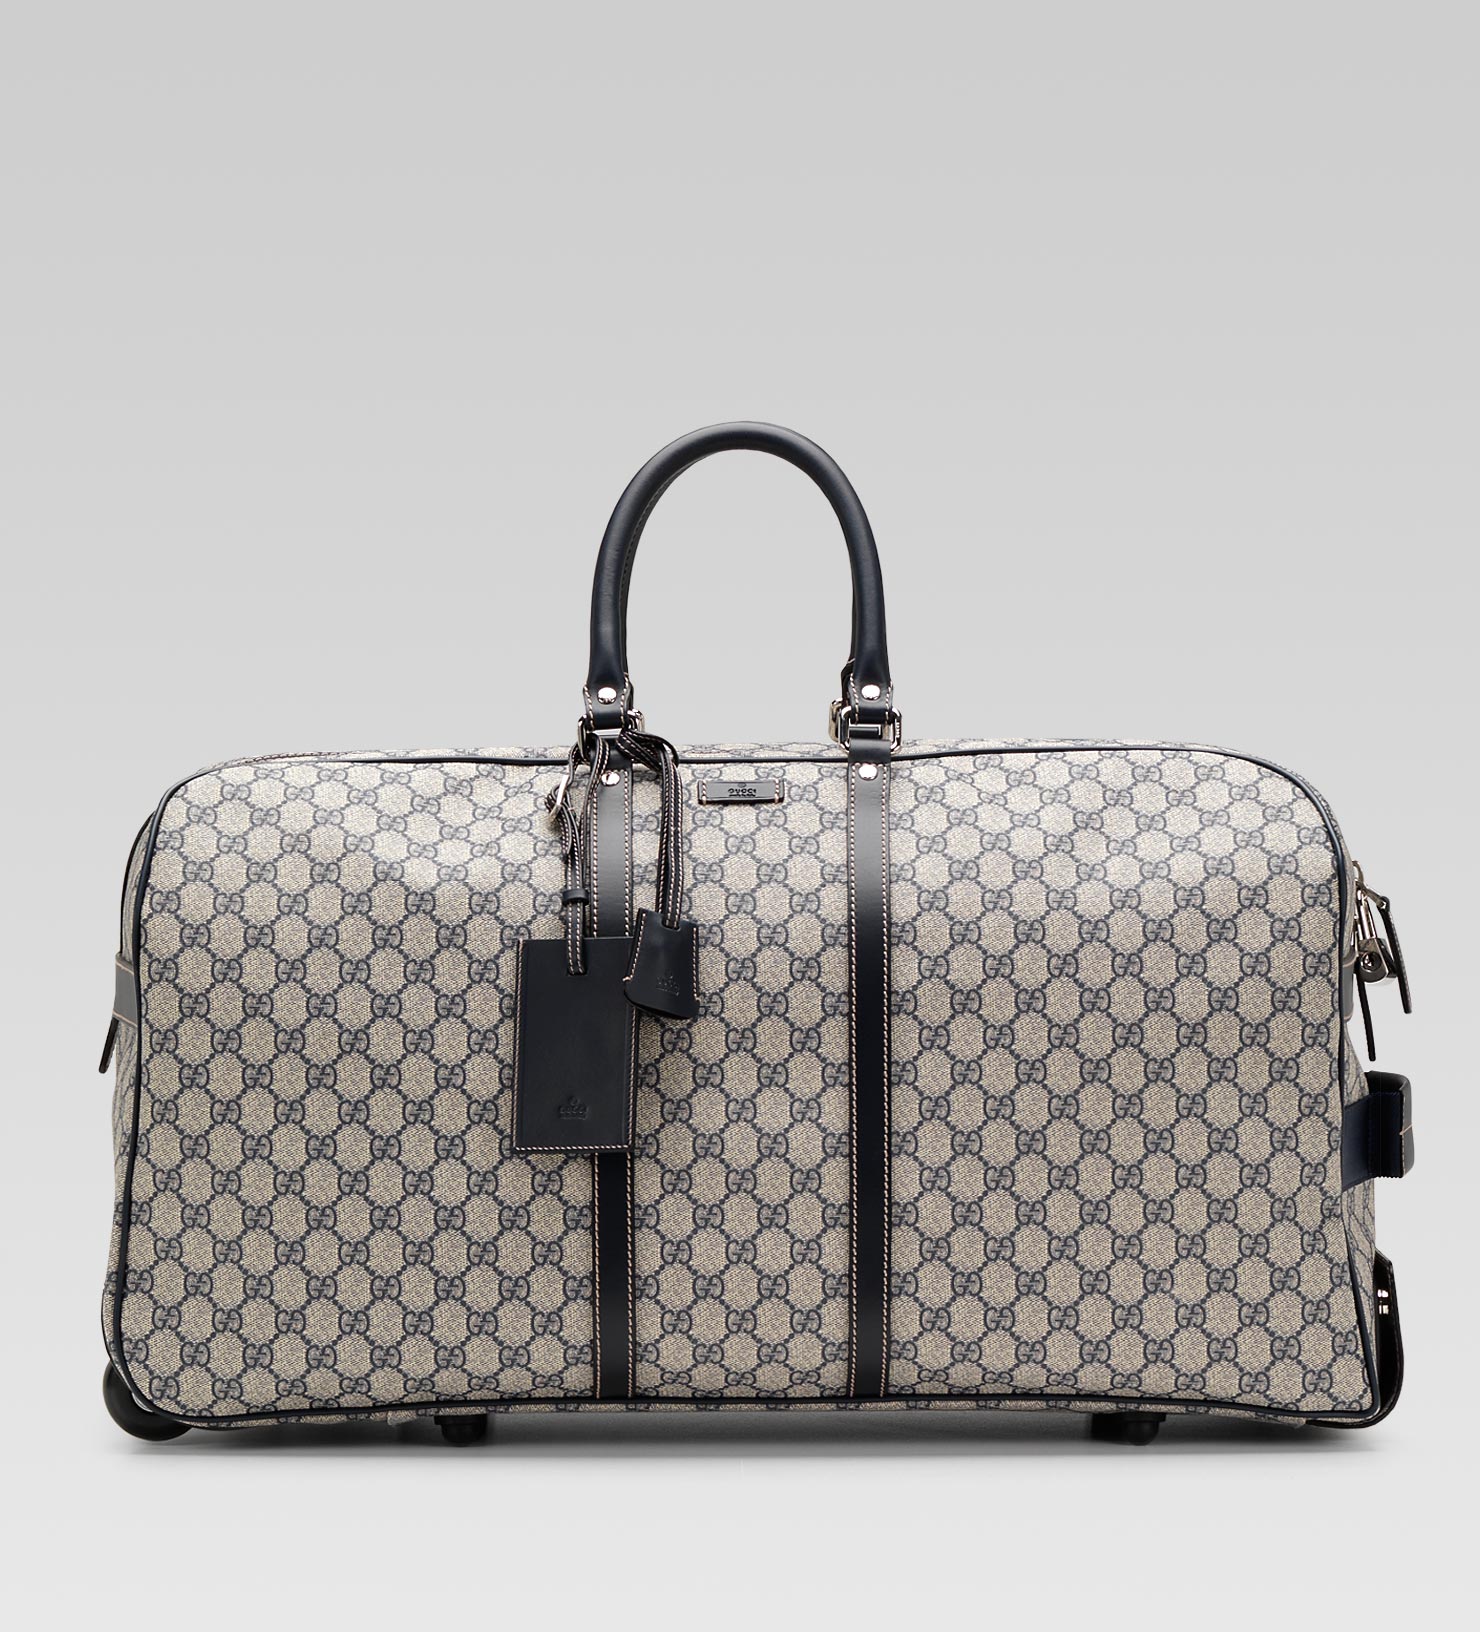 Lyst - Gucci Duffel with Wheels in Black for Men